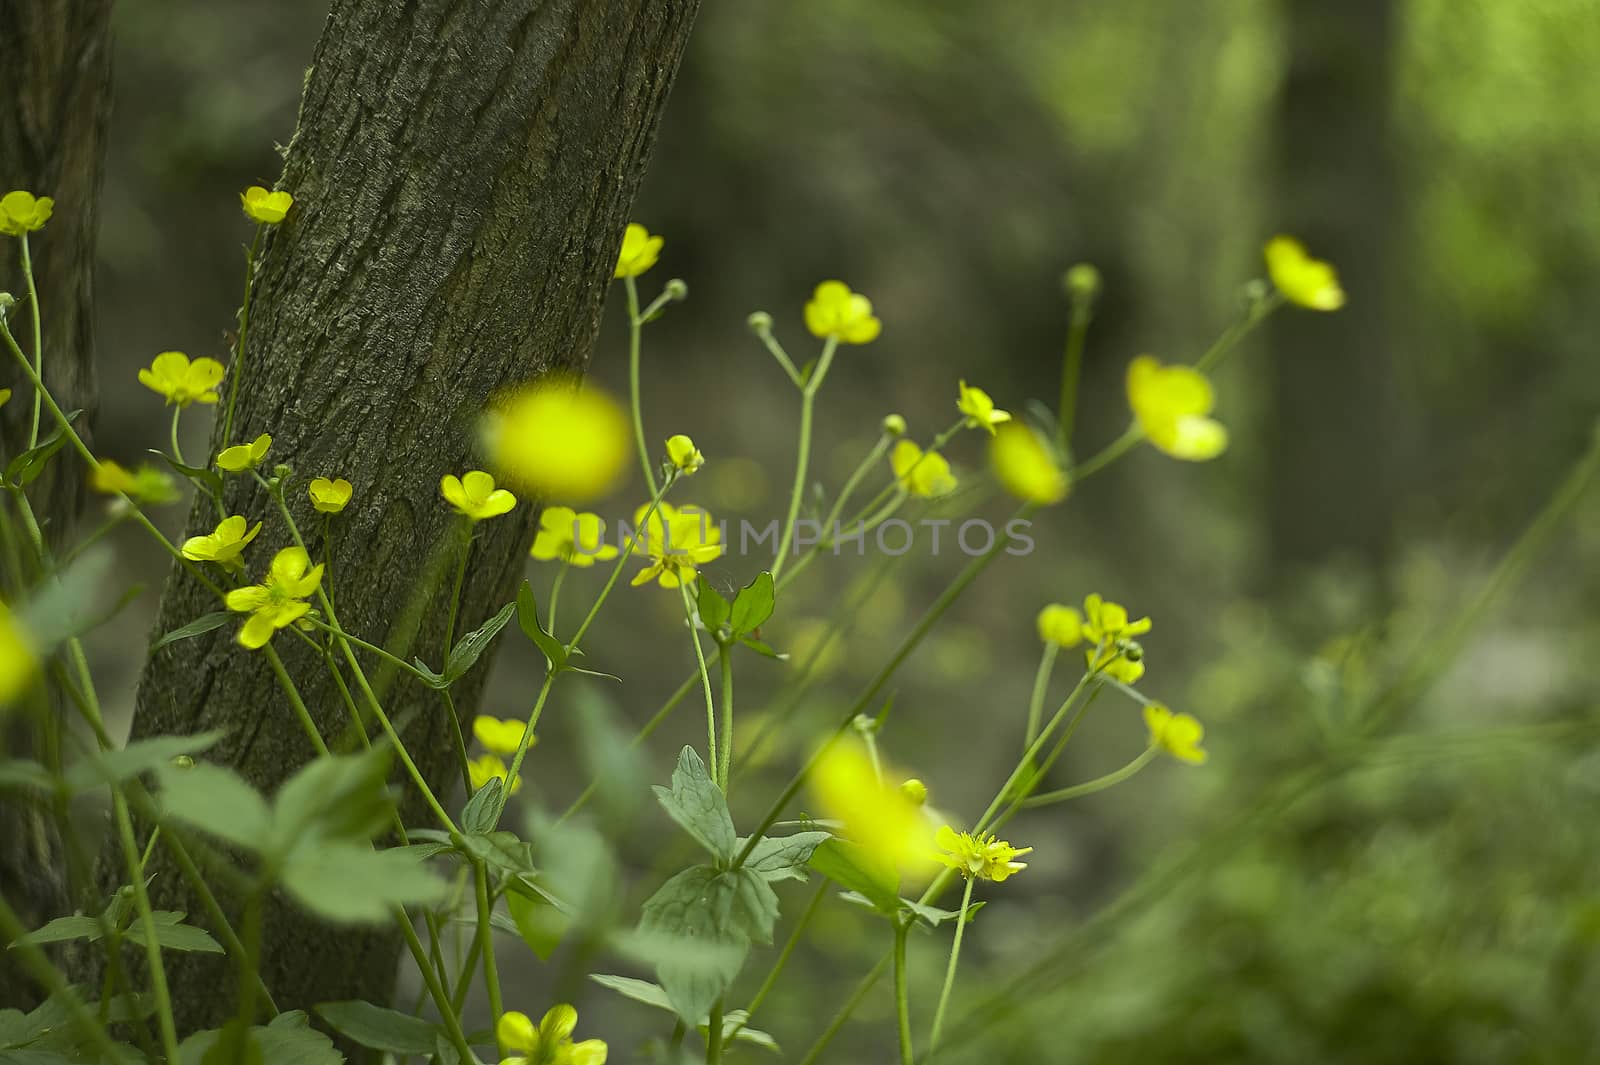 moltitude of yellow flowers by pippocarlot